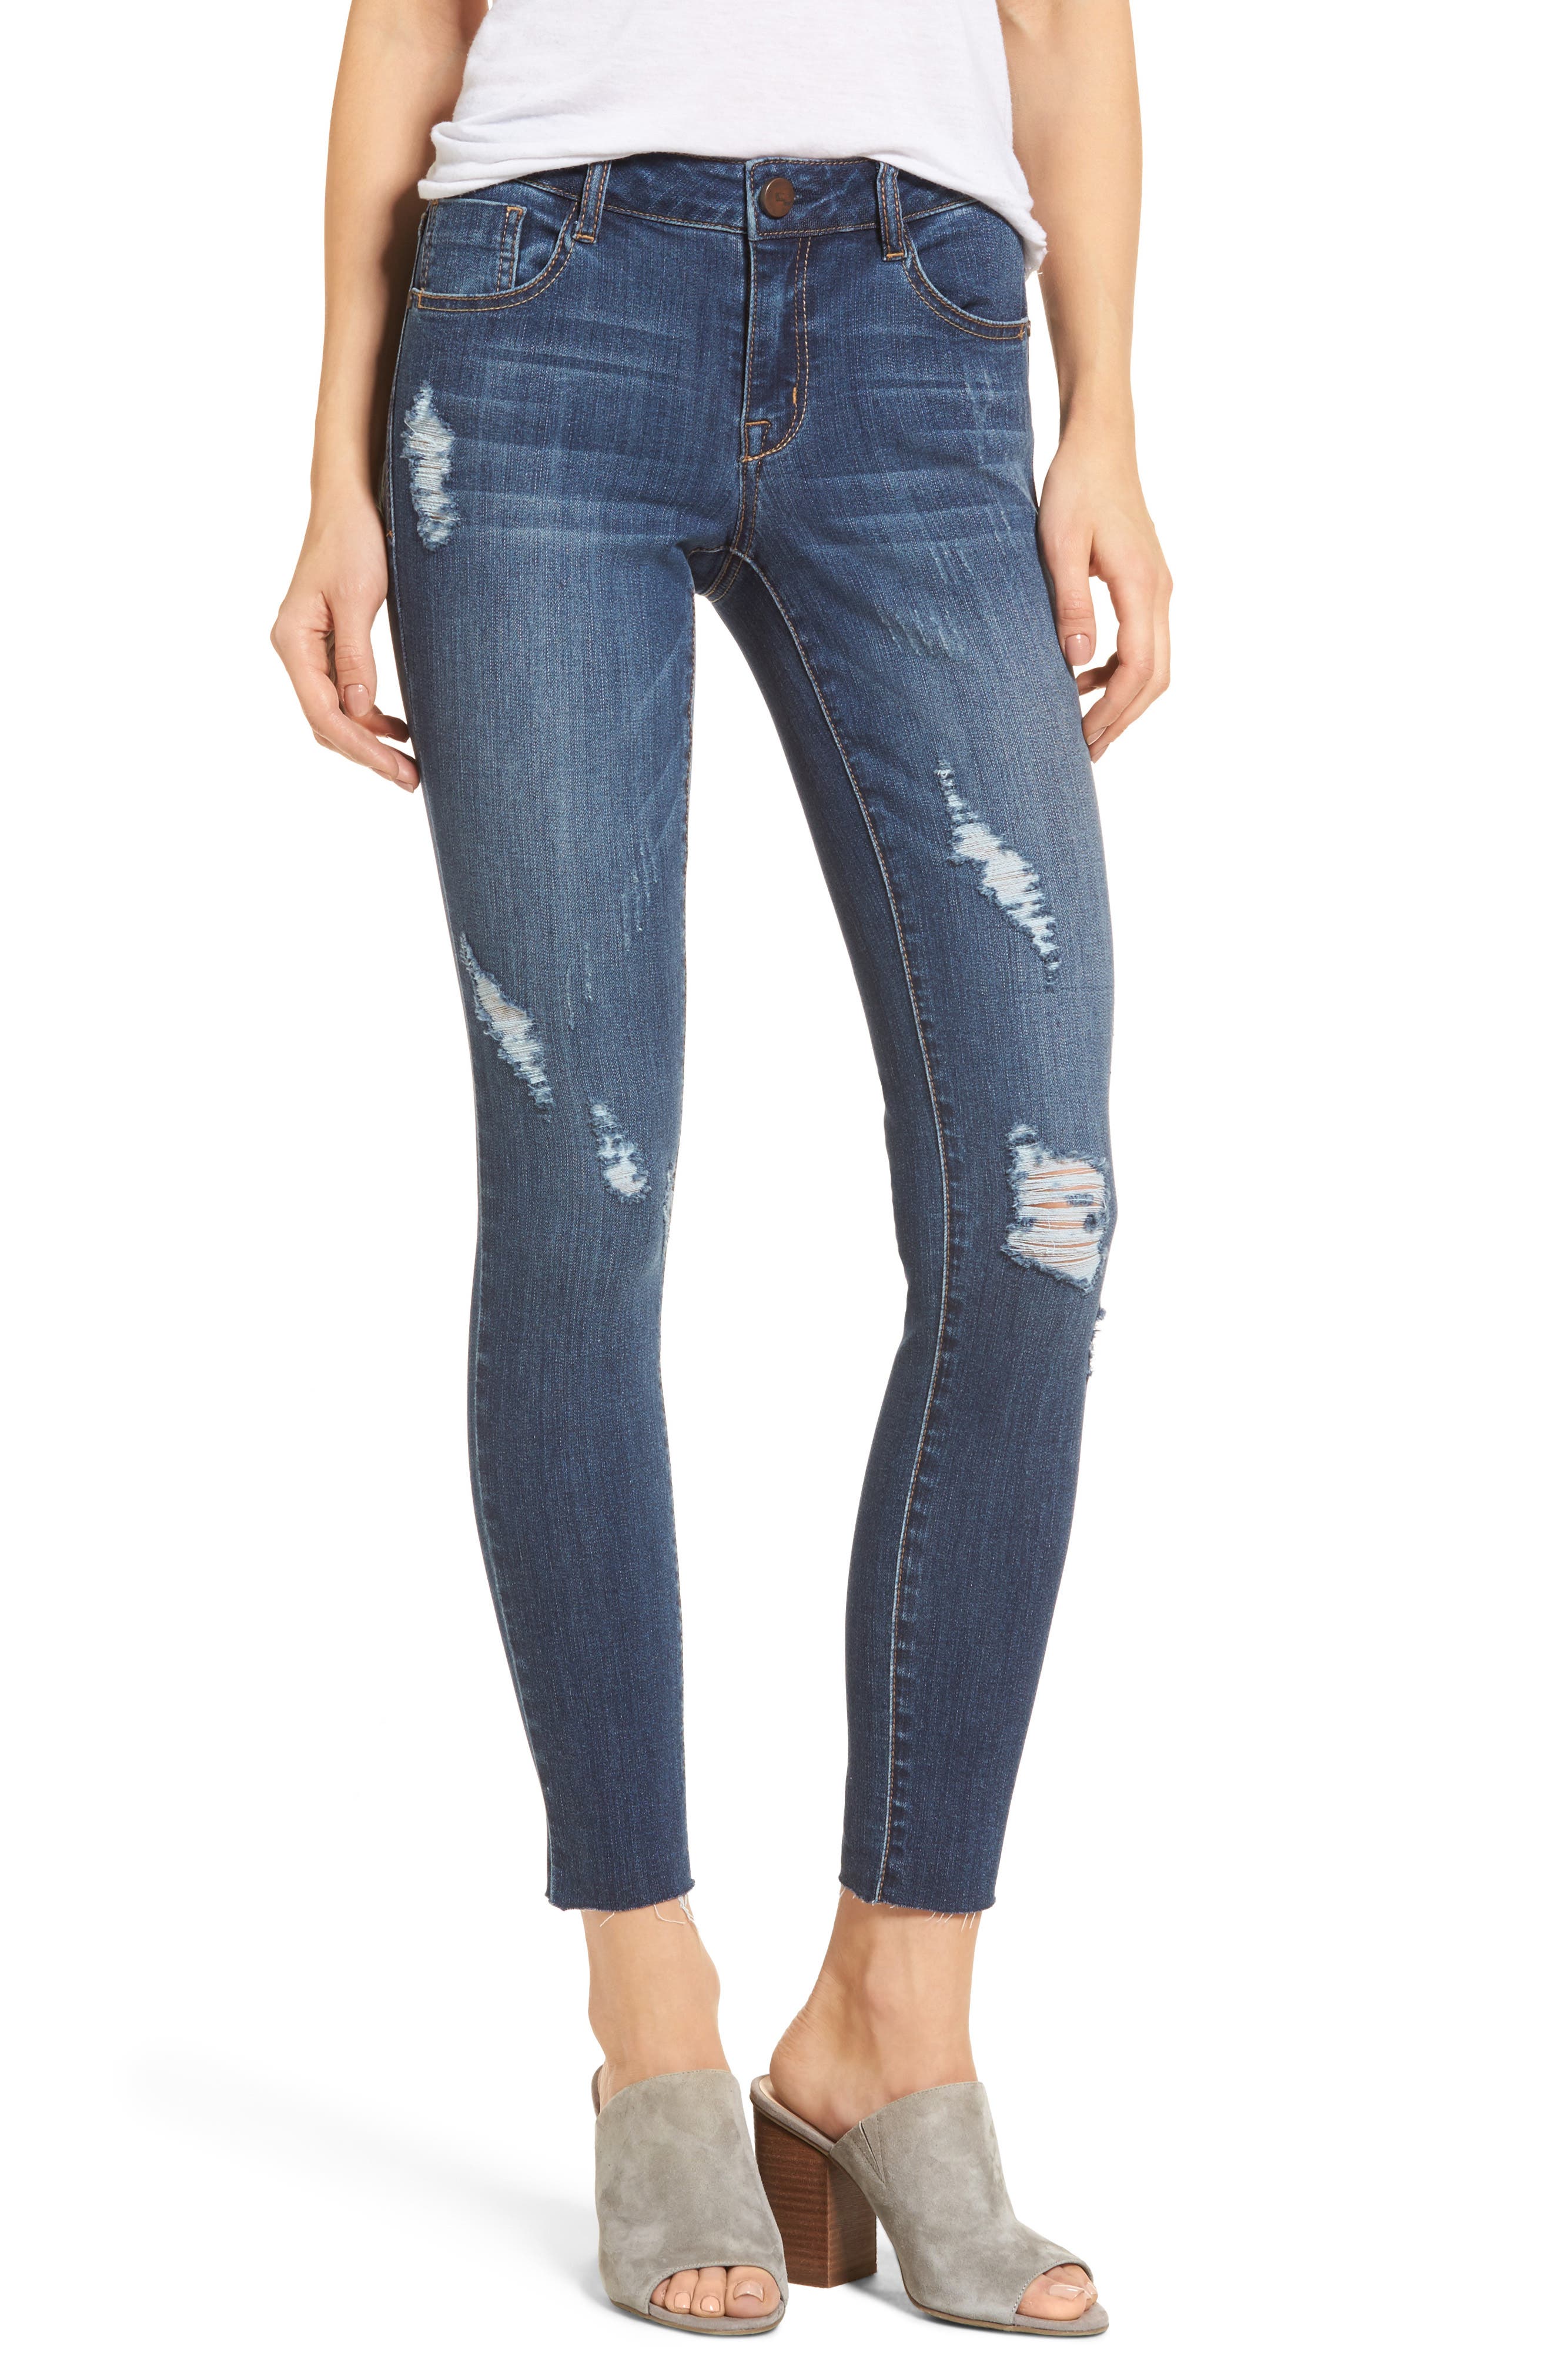 1822 distressed jeans